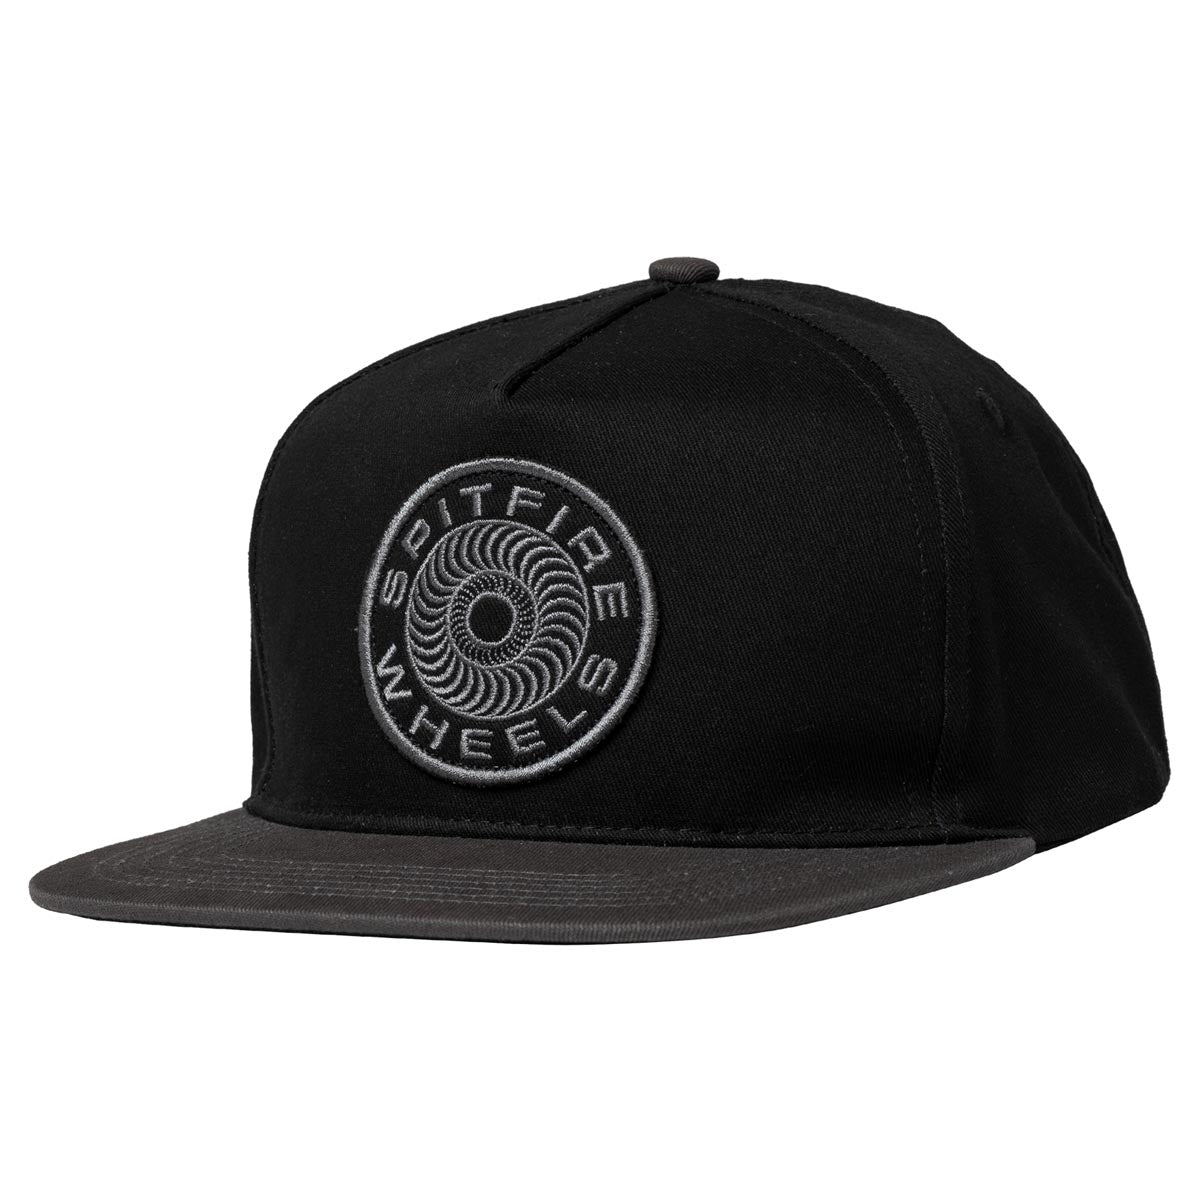 Spitfire Classic 87 Swirl Patch Snapback Hat - Black/Charcoal image 1